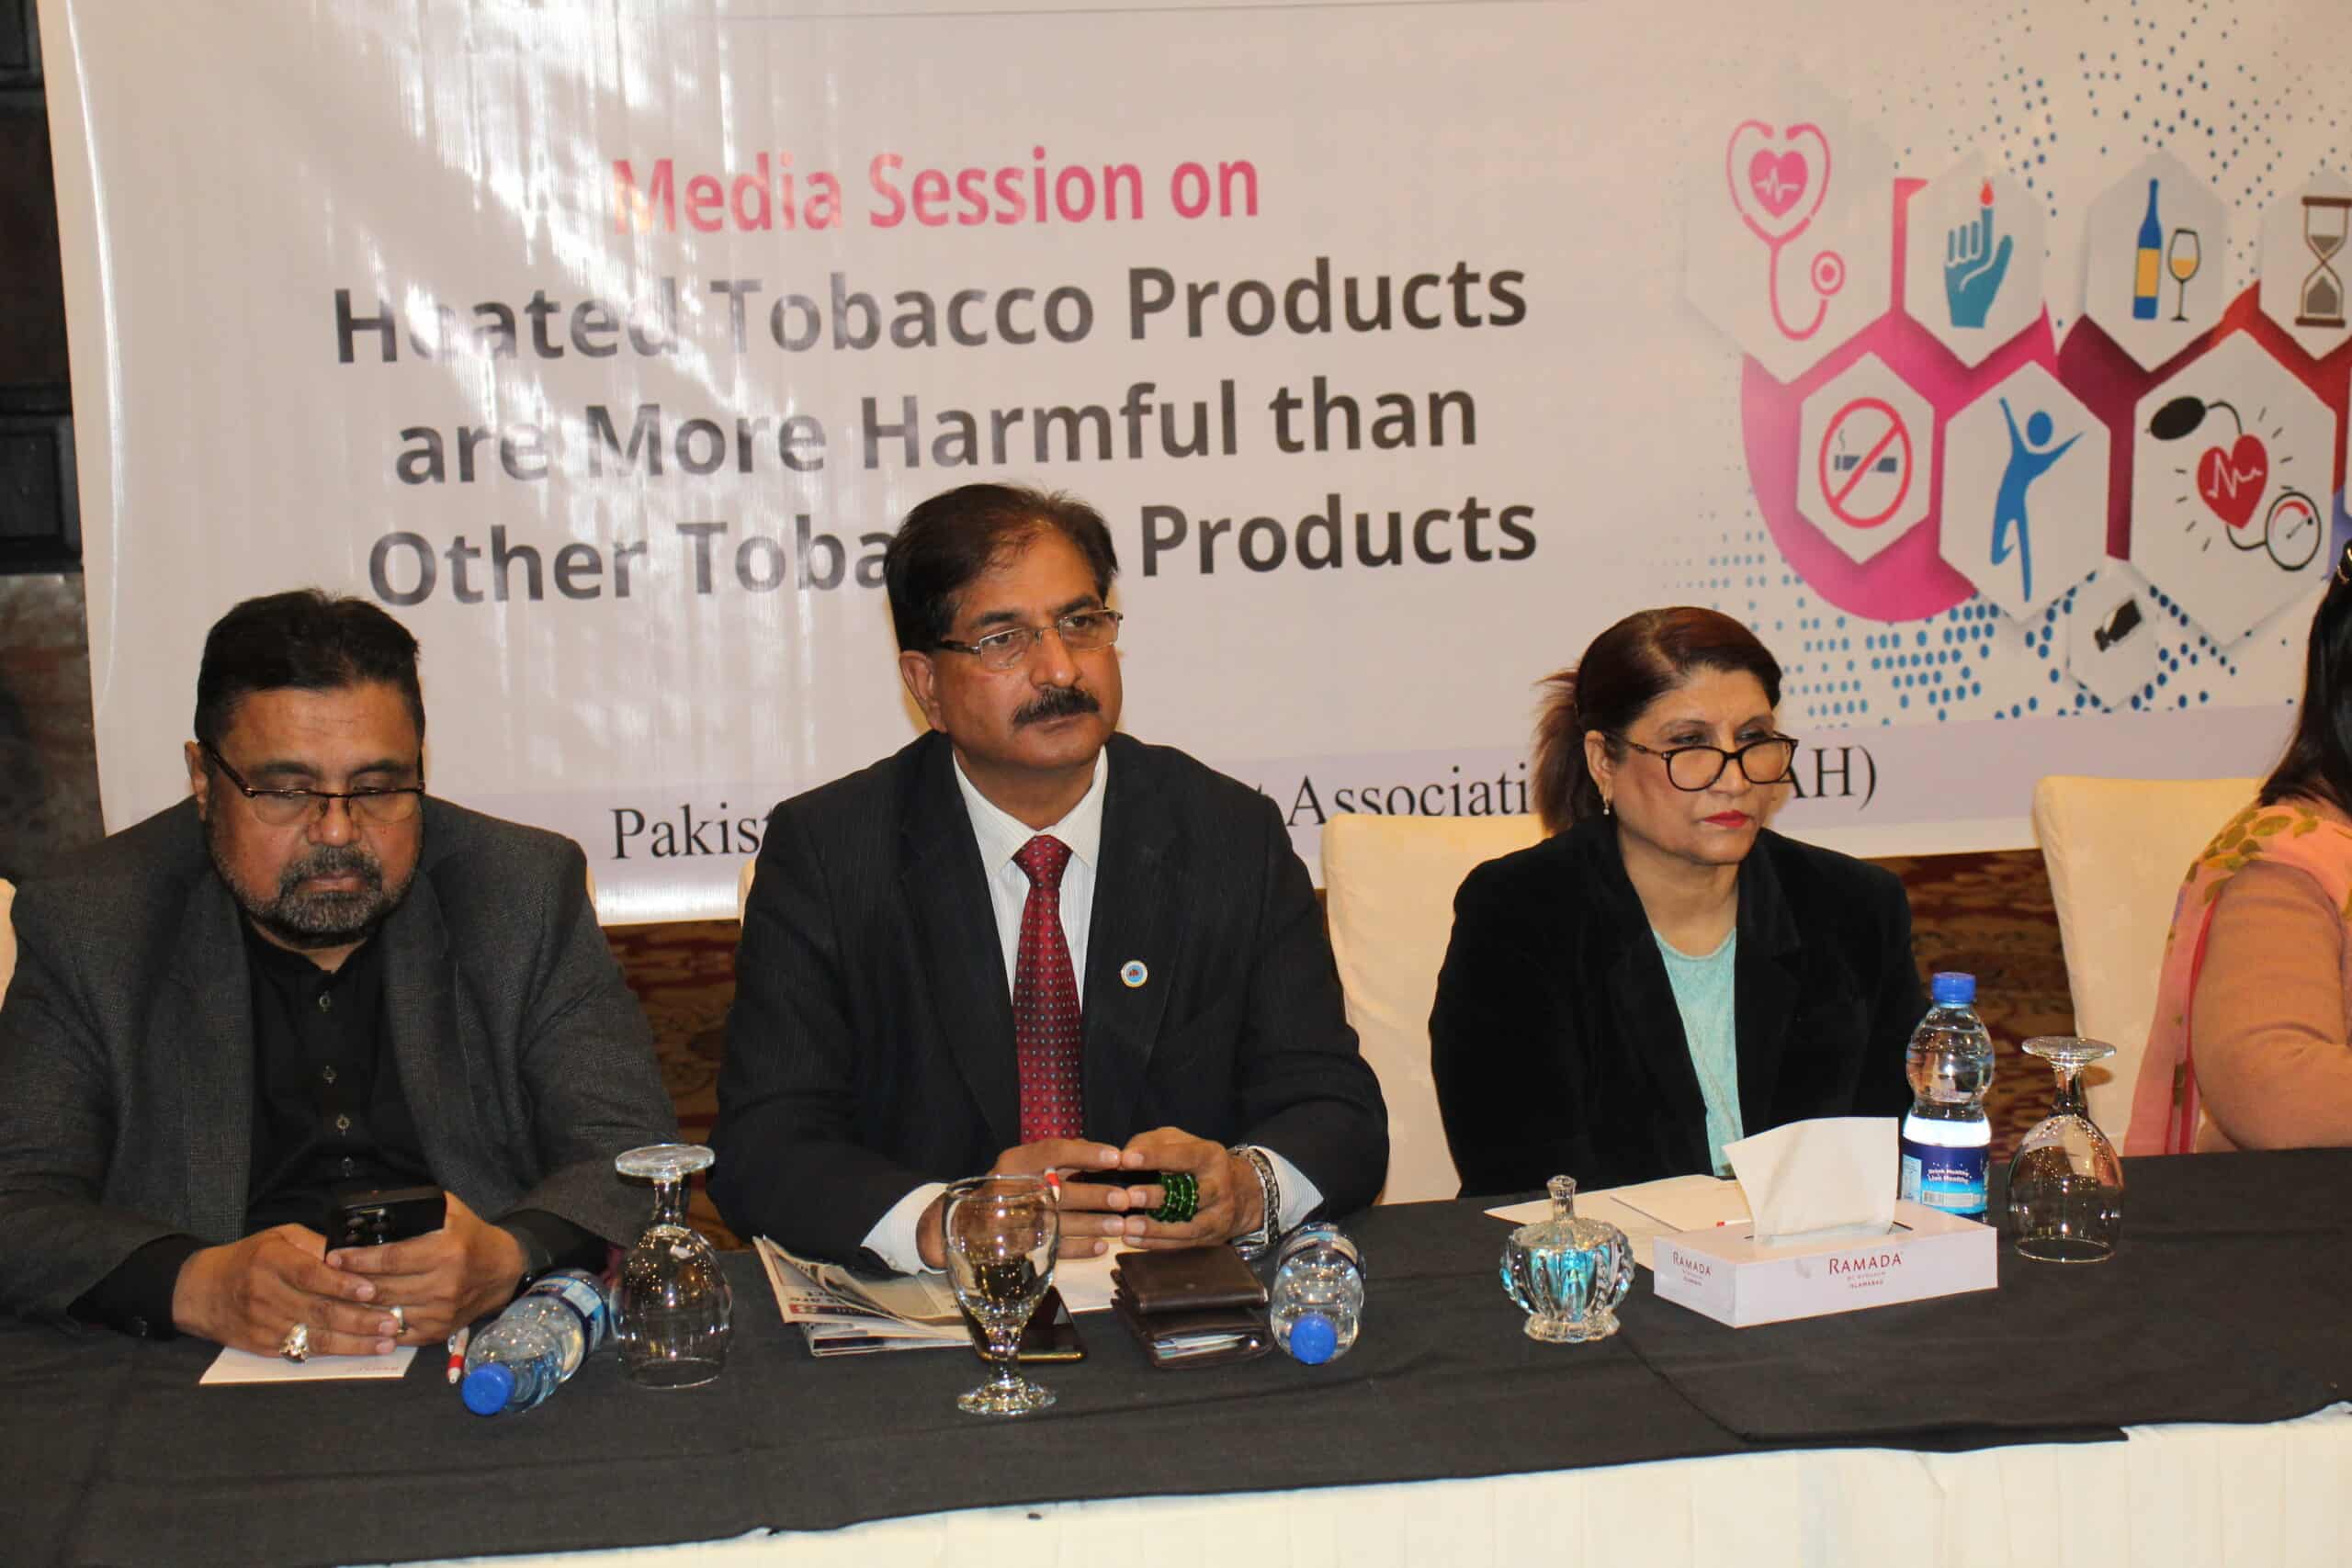 Panah Organized a  Media Session on  Heated    Tobacco products are More Harmful than   other Tobacco Products 23rd Dec at Ramada Hotel Islamabad